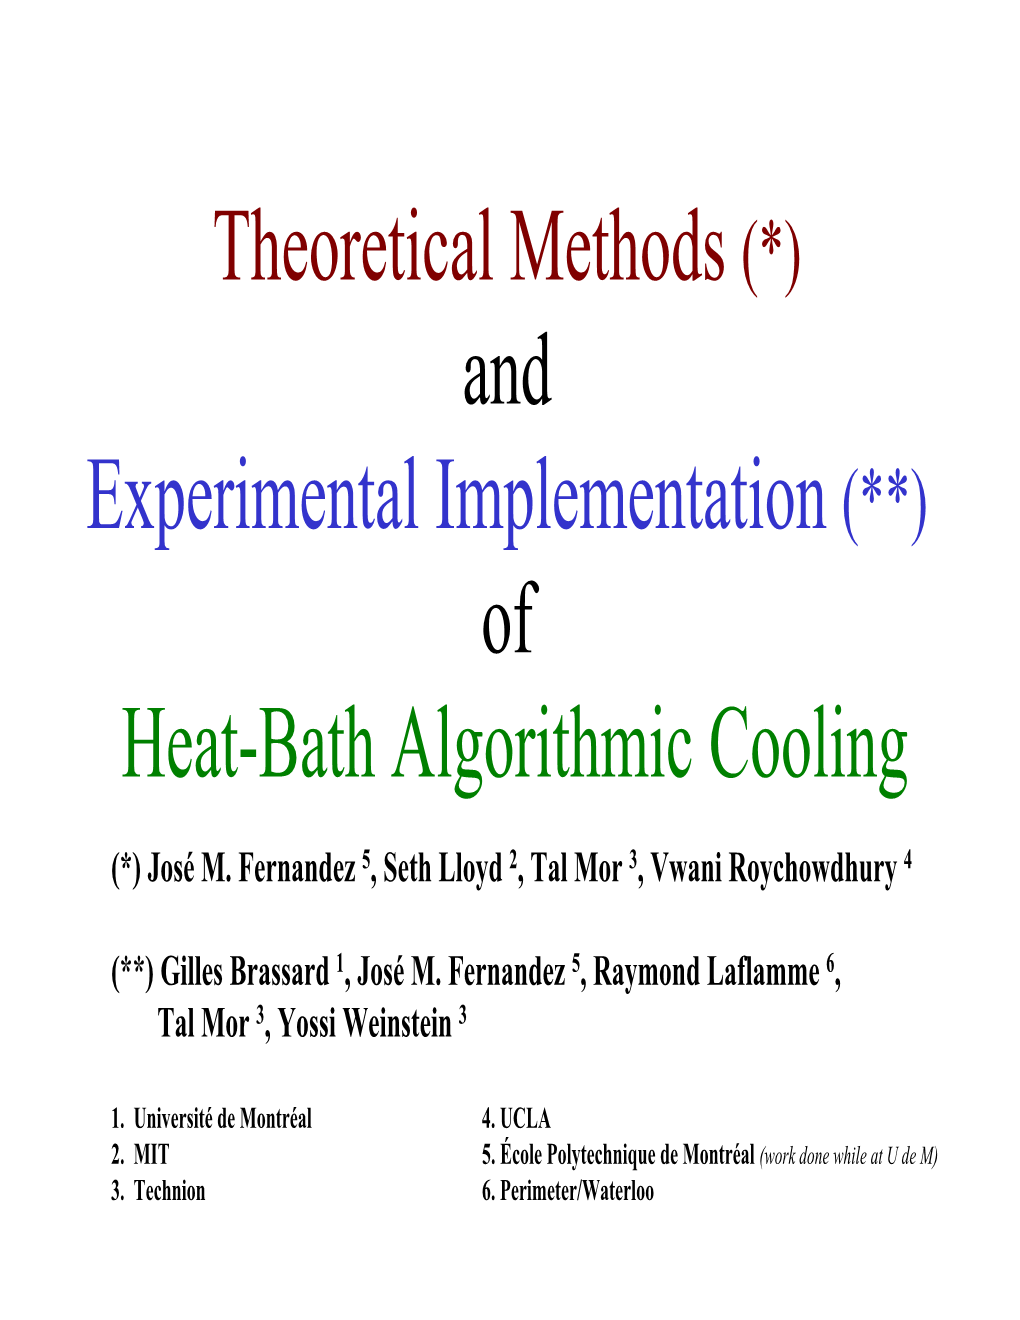 Theoretical Methods (*) and Experimental Implementation (**) of Heat-Bath Algorithmic Cooling